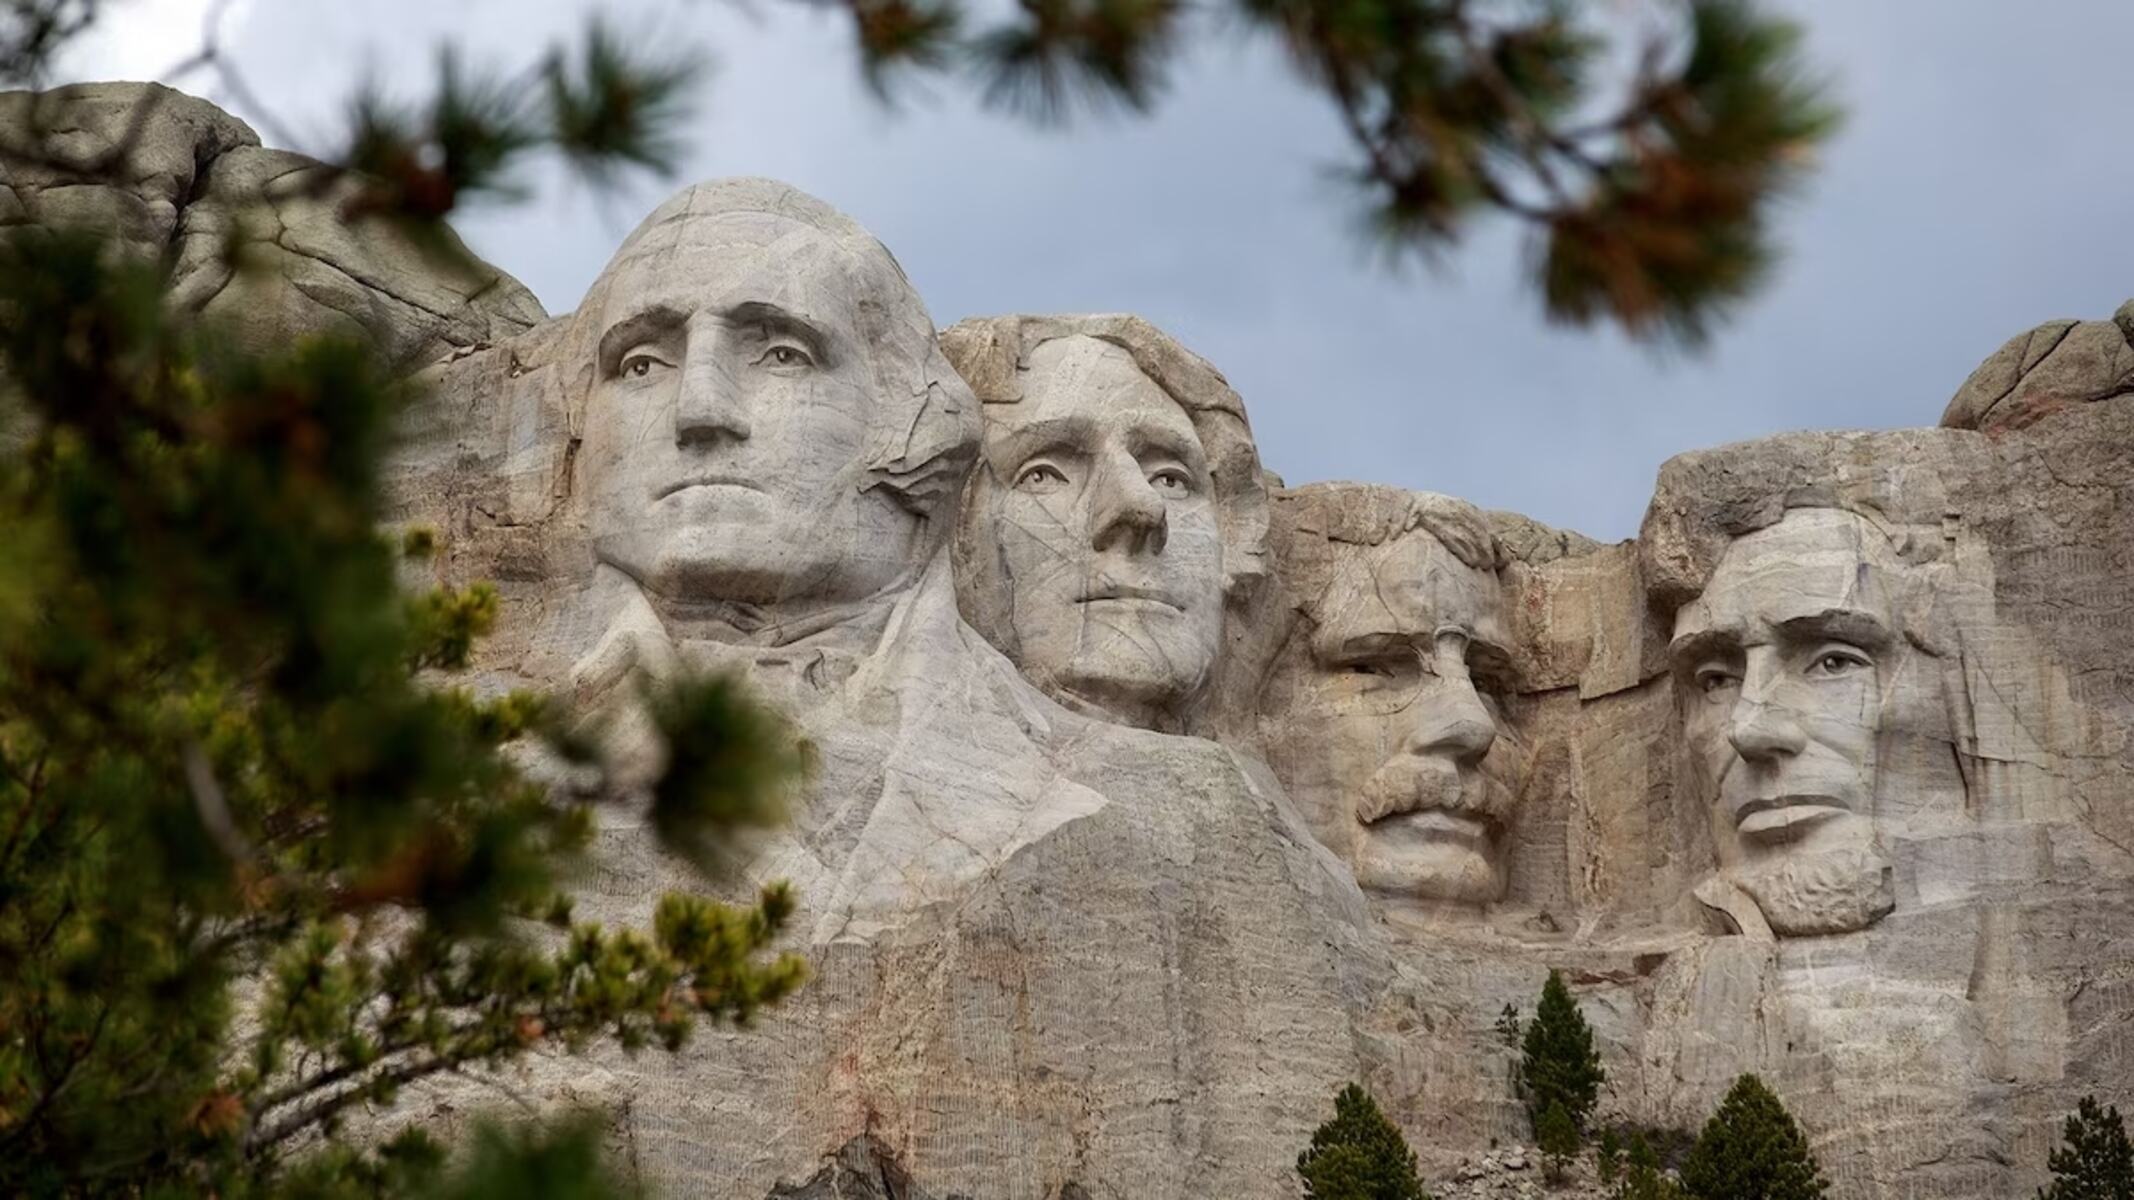 whose-idea-was-it-to-create-a-sculpture-on-mount-rushmore